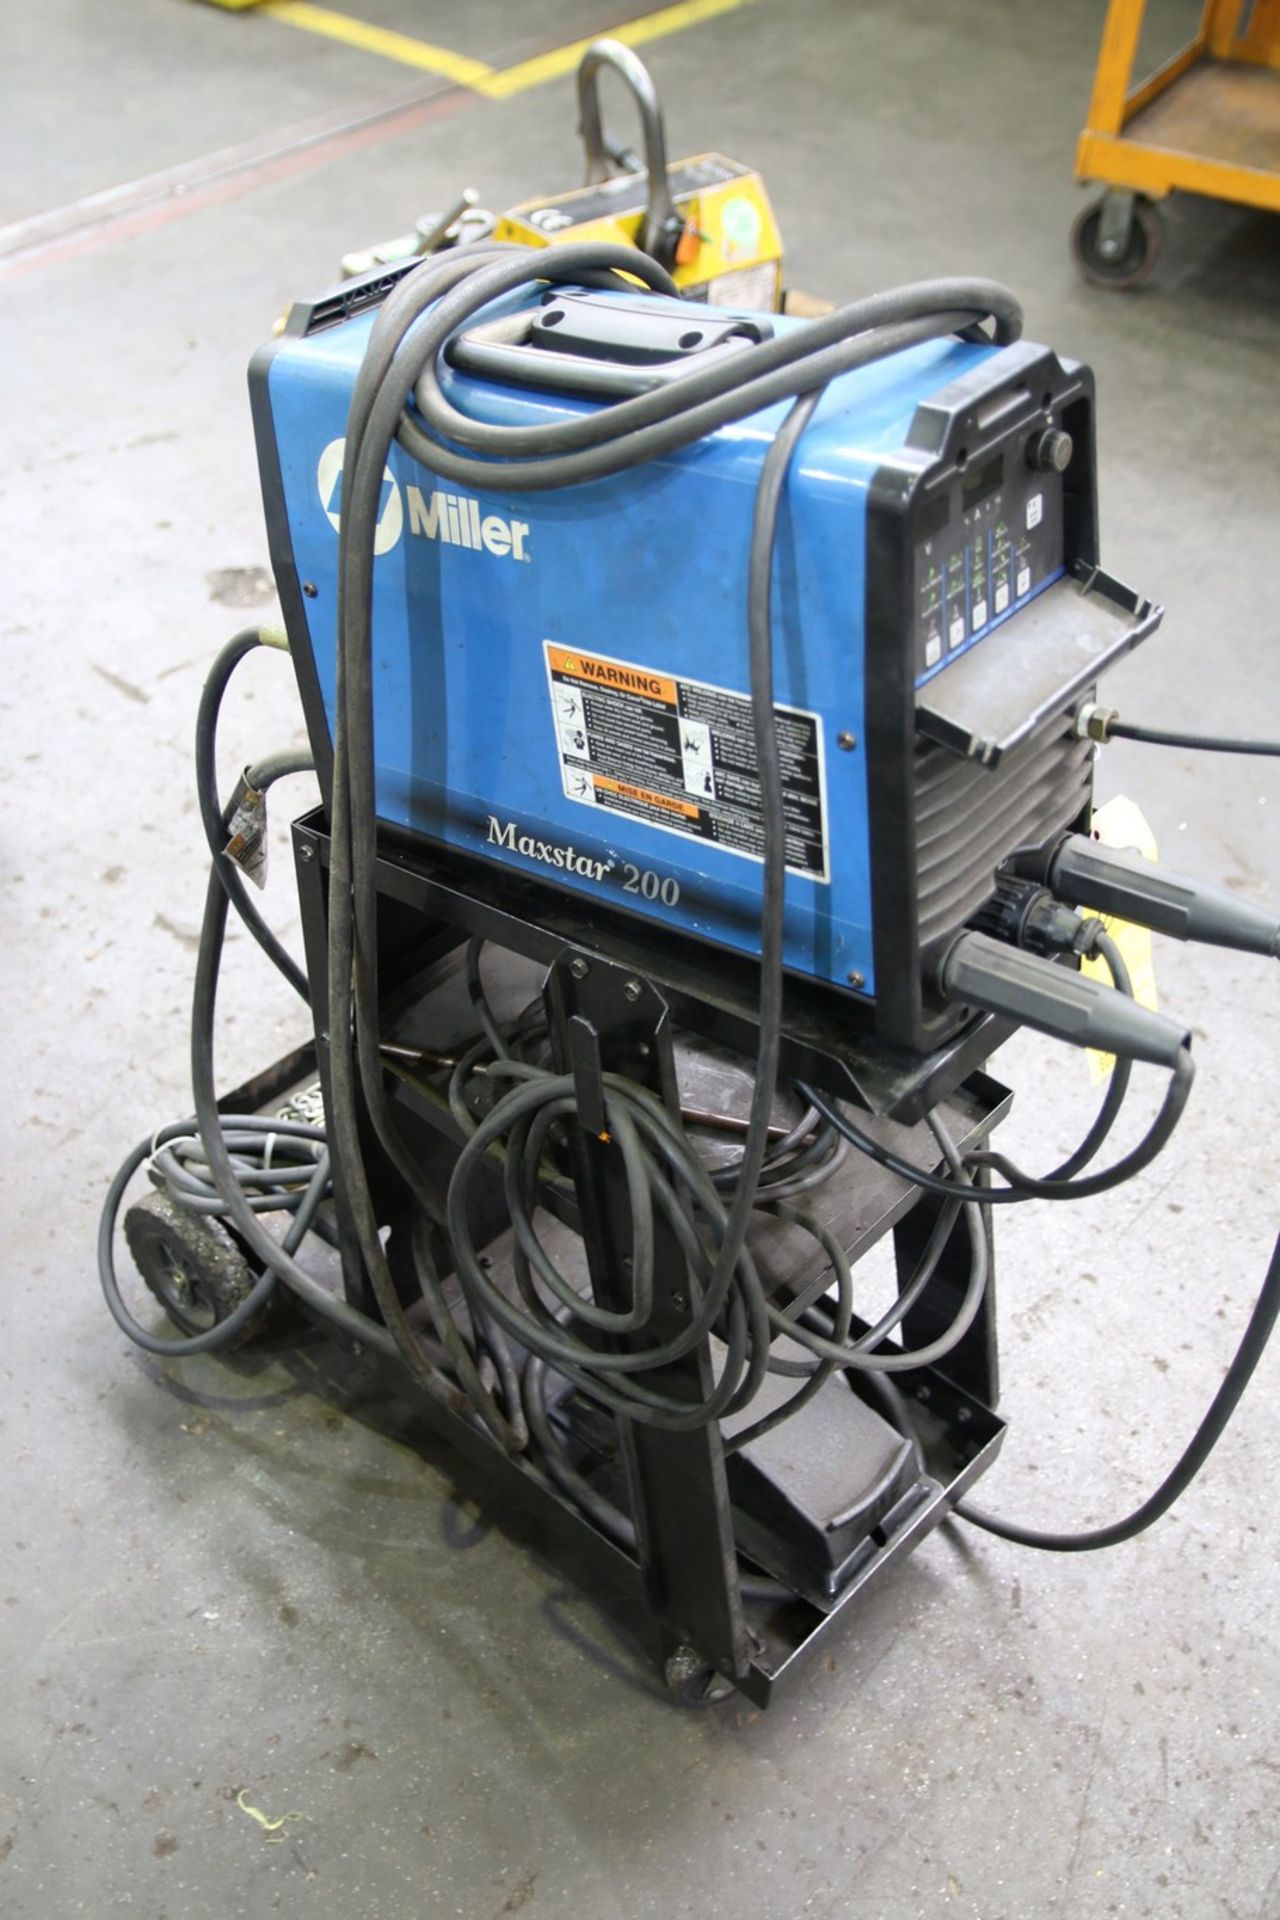 Miller Maxstar 200 Miller Maxstar 200 Welder with Cart and Accessories - Image 3 of 4